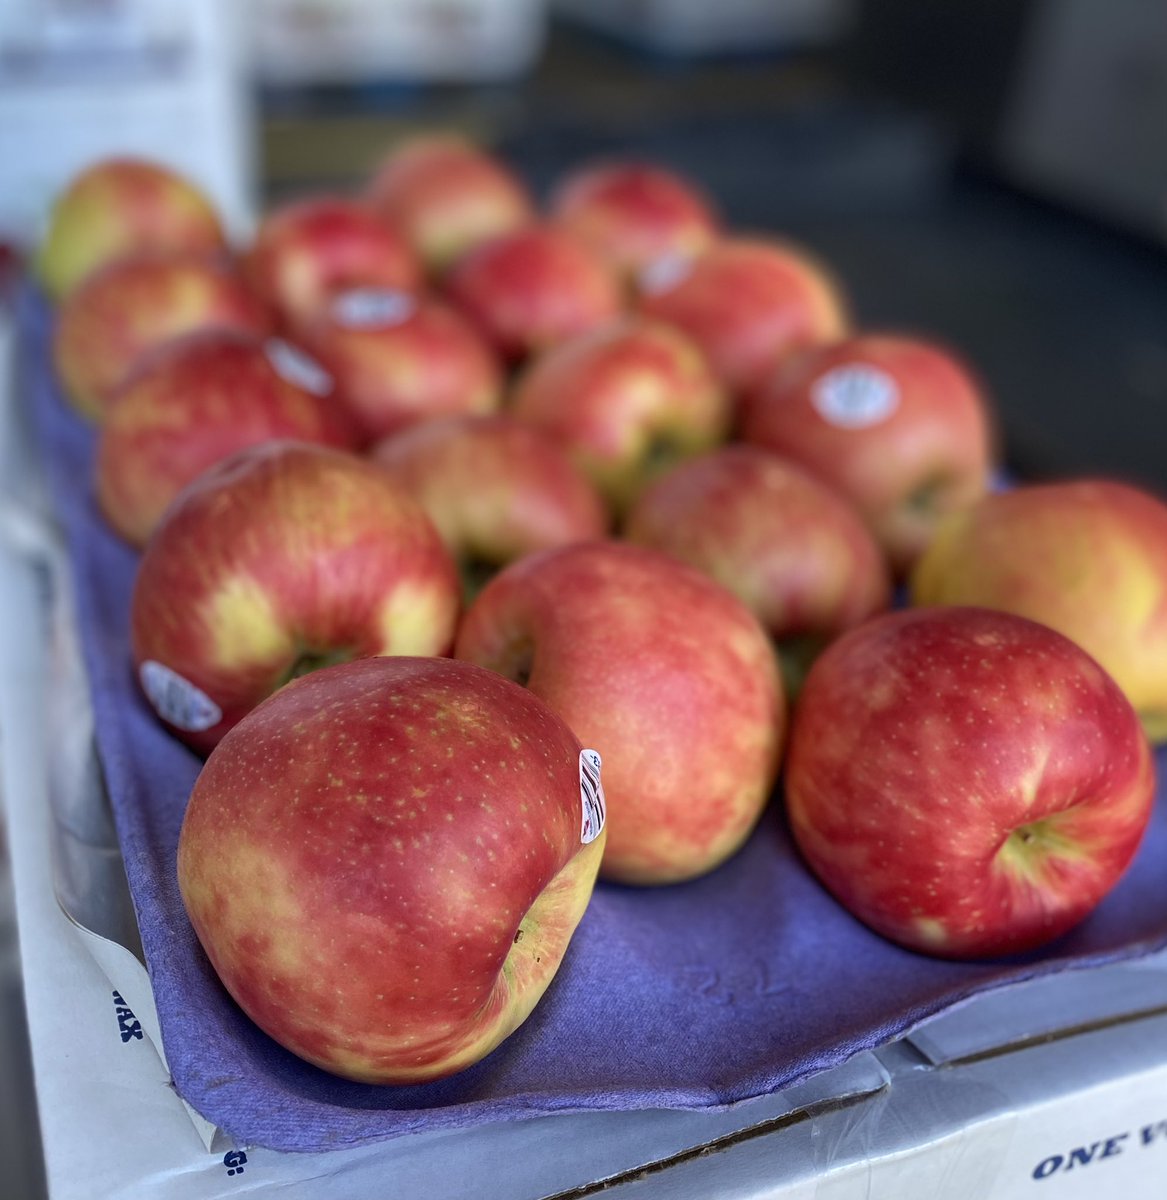 Some nice looking #organic #honeycrispapples I looked at today for an account. I do love the look of a nice organic apple and how fresh they appear. #apples